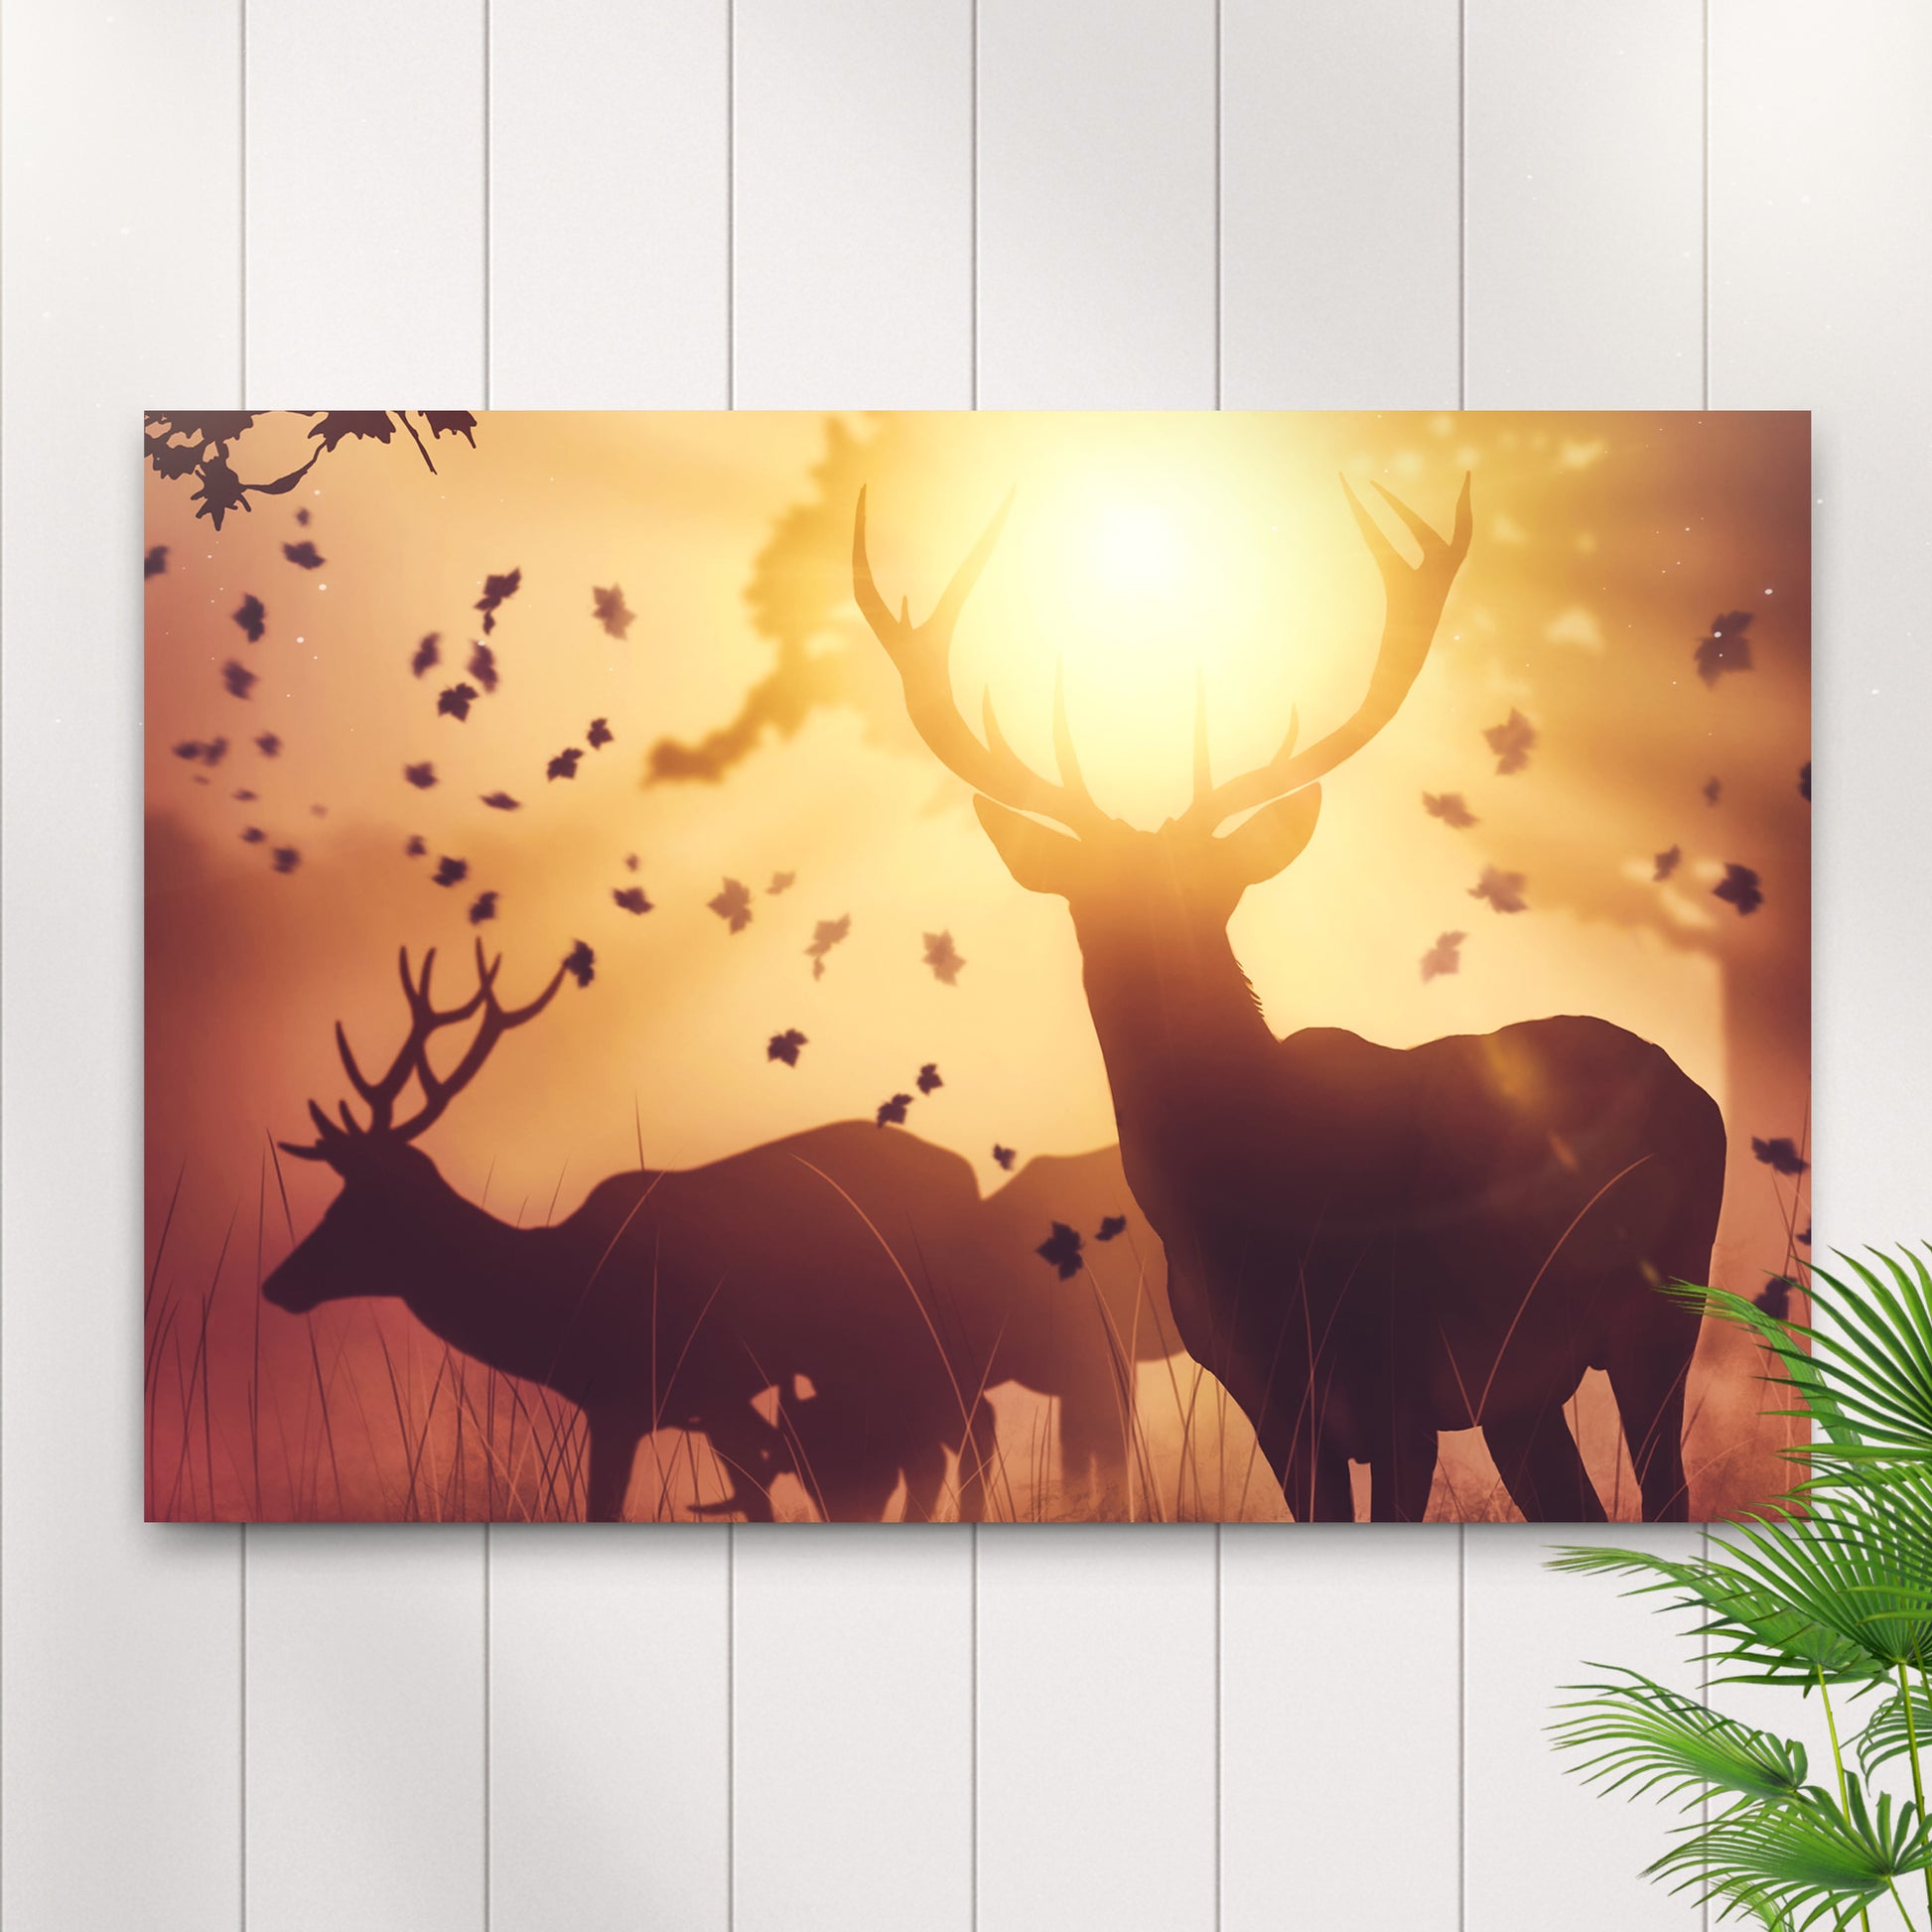 Deer At Sunset Canvas Wall Art - Image by Tailored Canvases